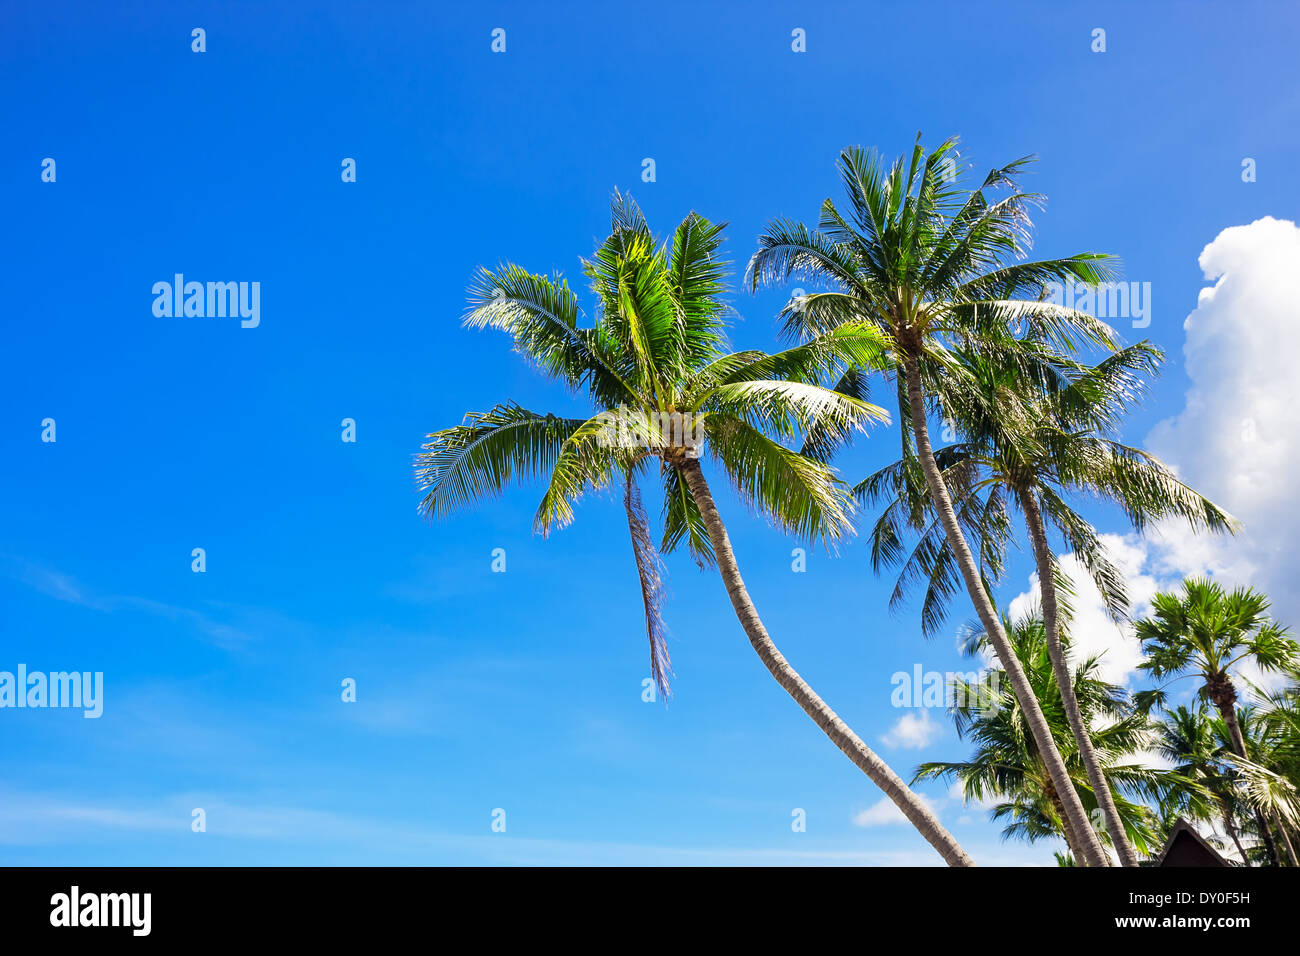 Coconut palm trees against blue sky Stock Photo